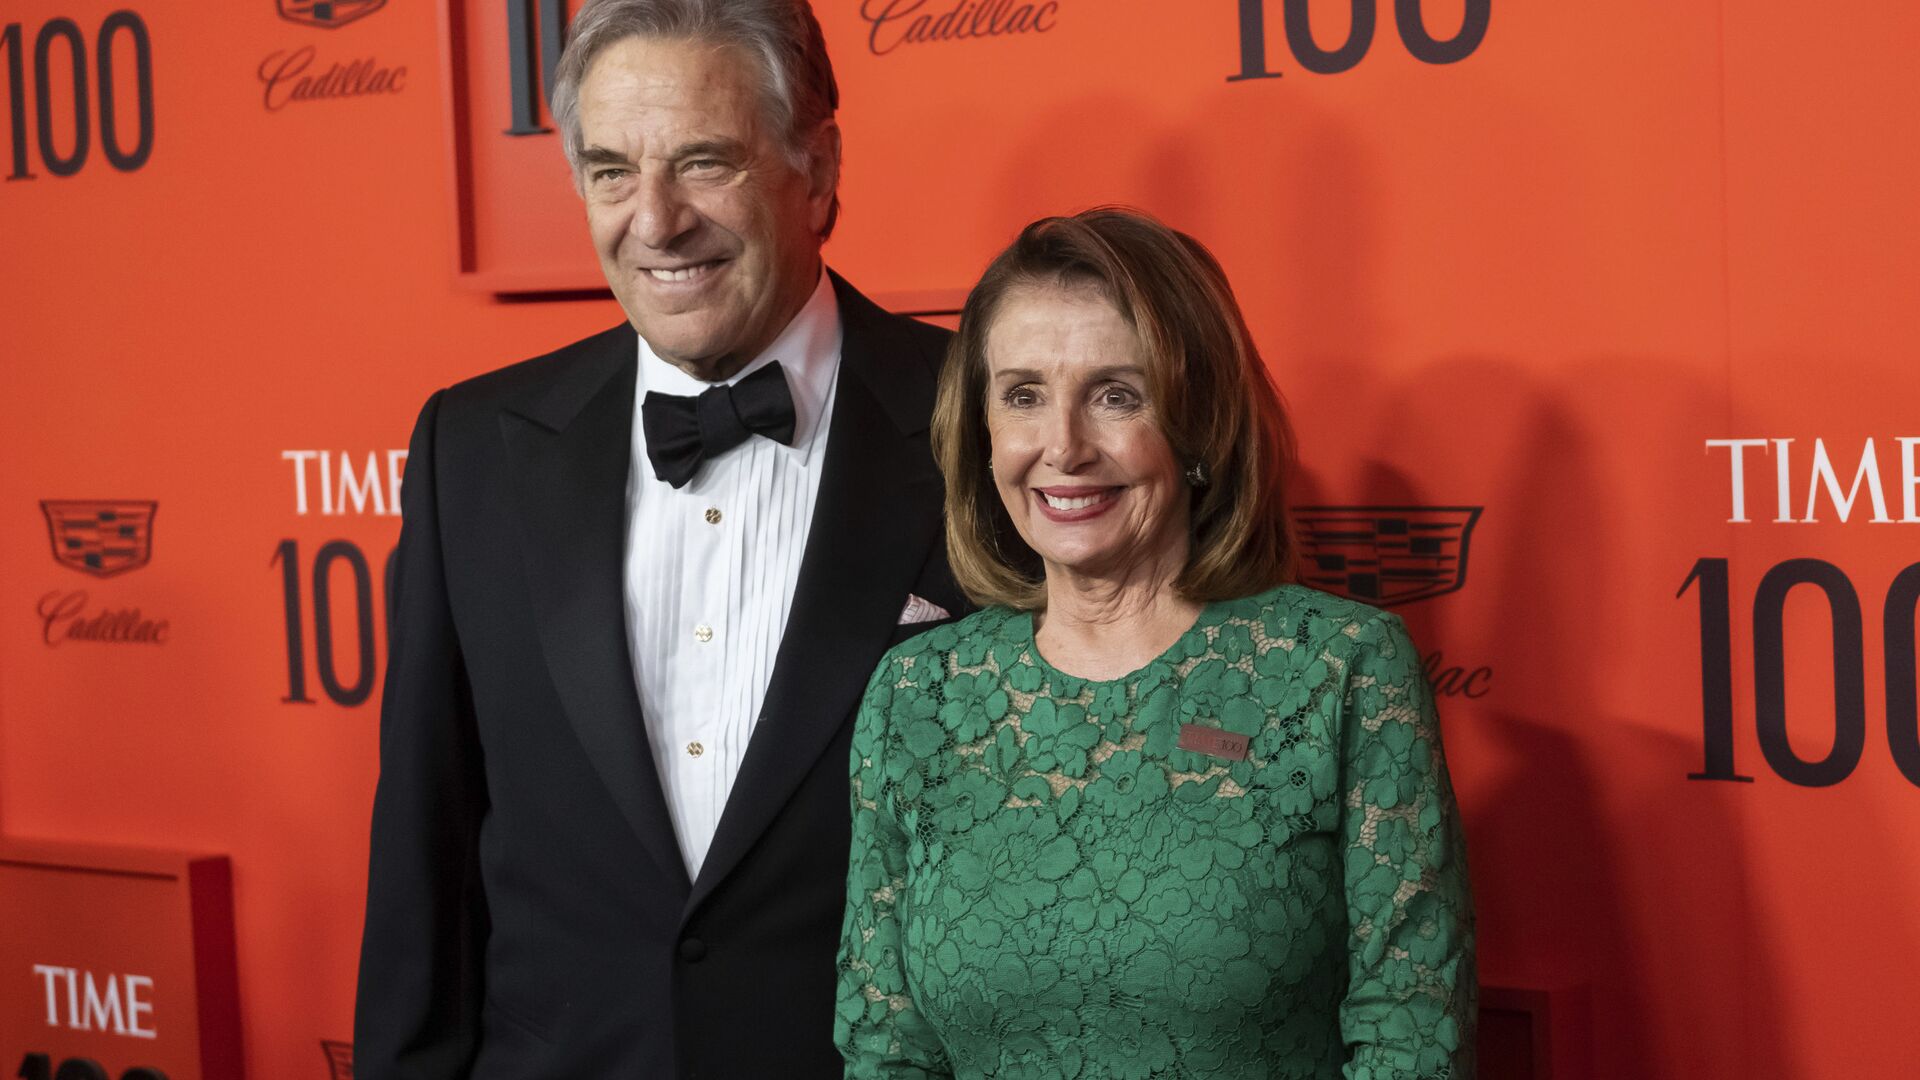 Paul Pelosi and Nancy Pelosi attend the 2019 Time 100 Gala, celebrating the 100 most influential people in the world, at Frederick P. Rose Hall, Jazz at Lincoln Center on Tuesday, April 23, 2019, in New York - Sputnik International, 1920, 30.05.2022